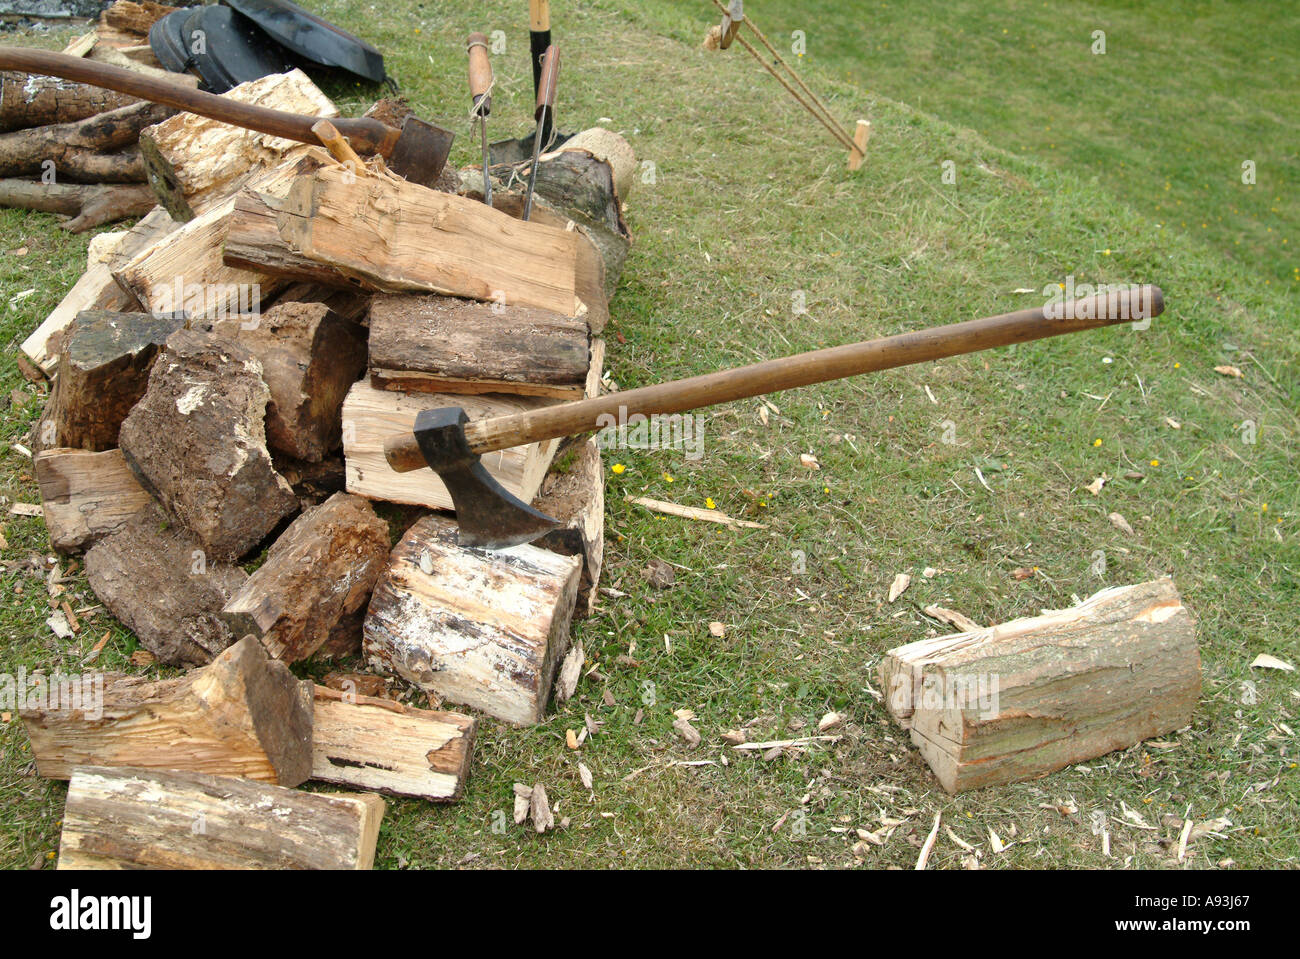 Axe and Pile of wood Stock Photo